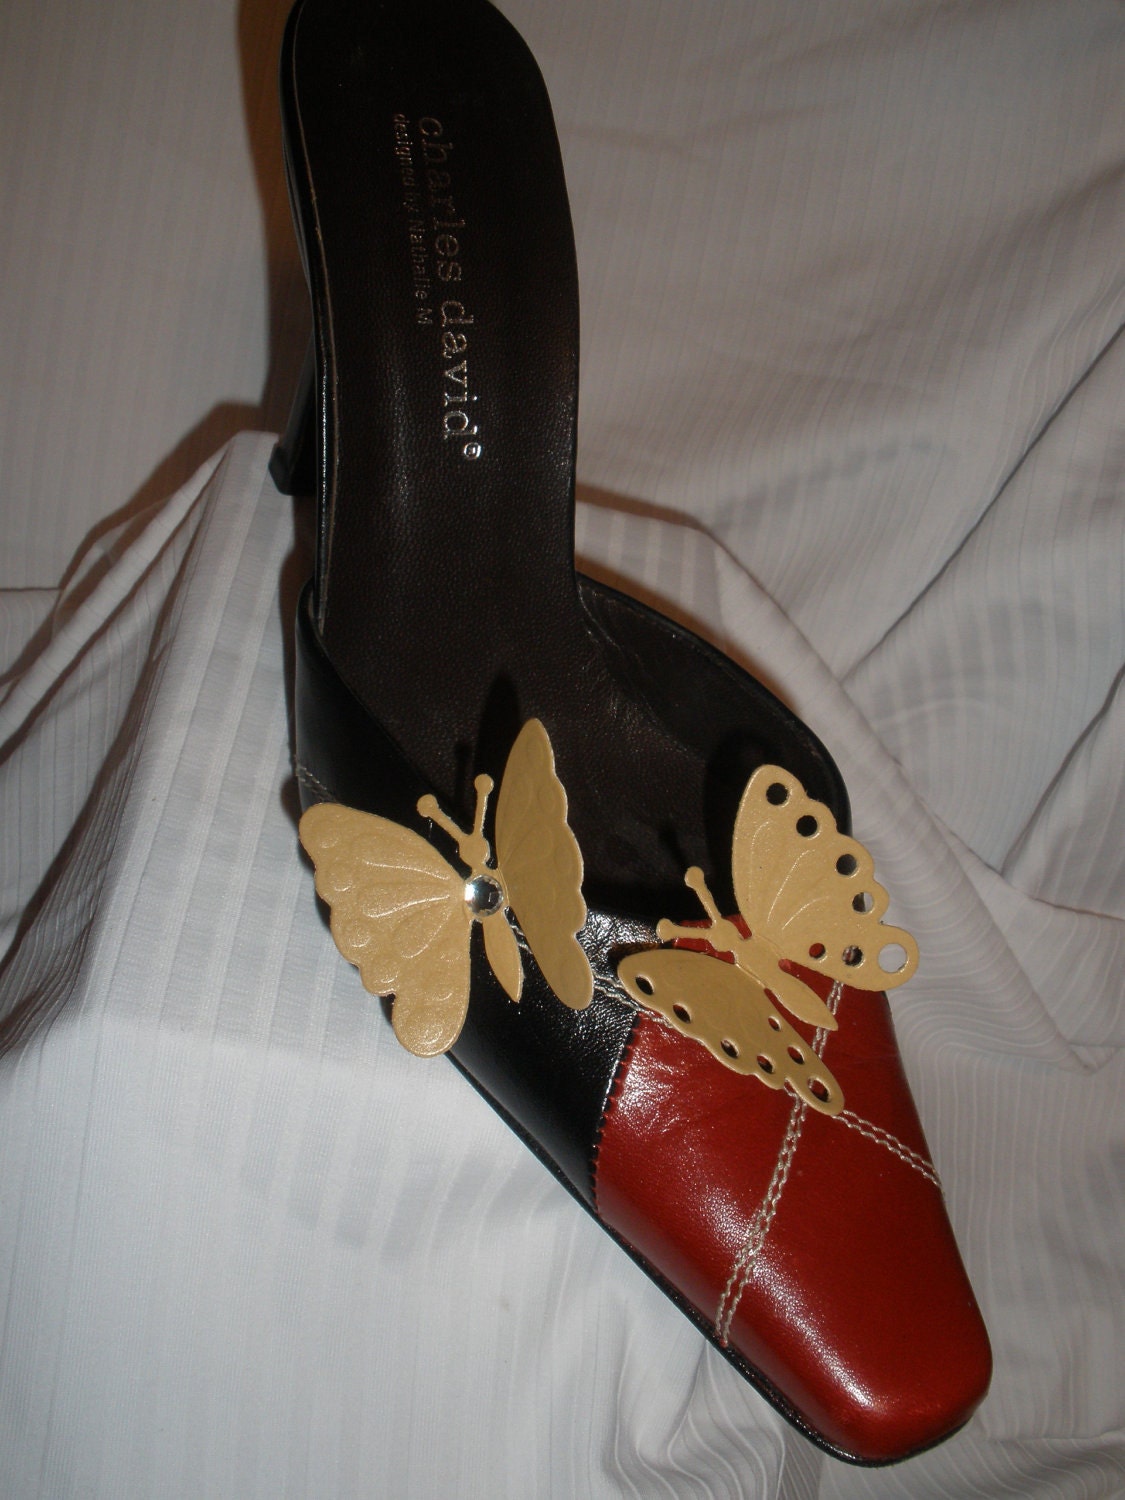 Adorable Butterfly Stick On's Shoe Accessories for High Heels, Flat, Bridal Party, Women Shoes, Not Shoe Clips